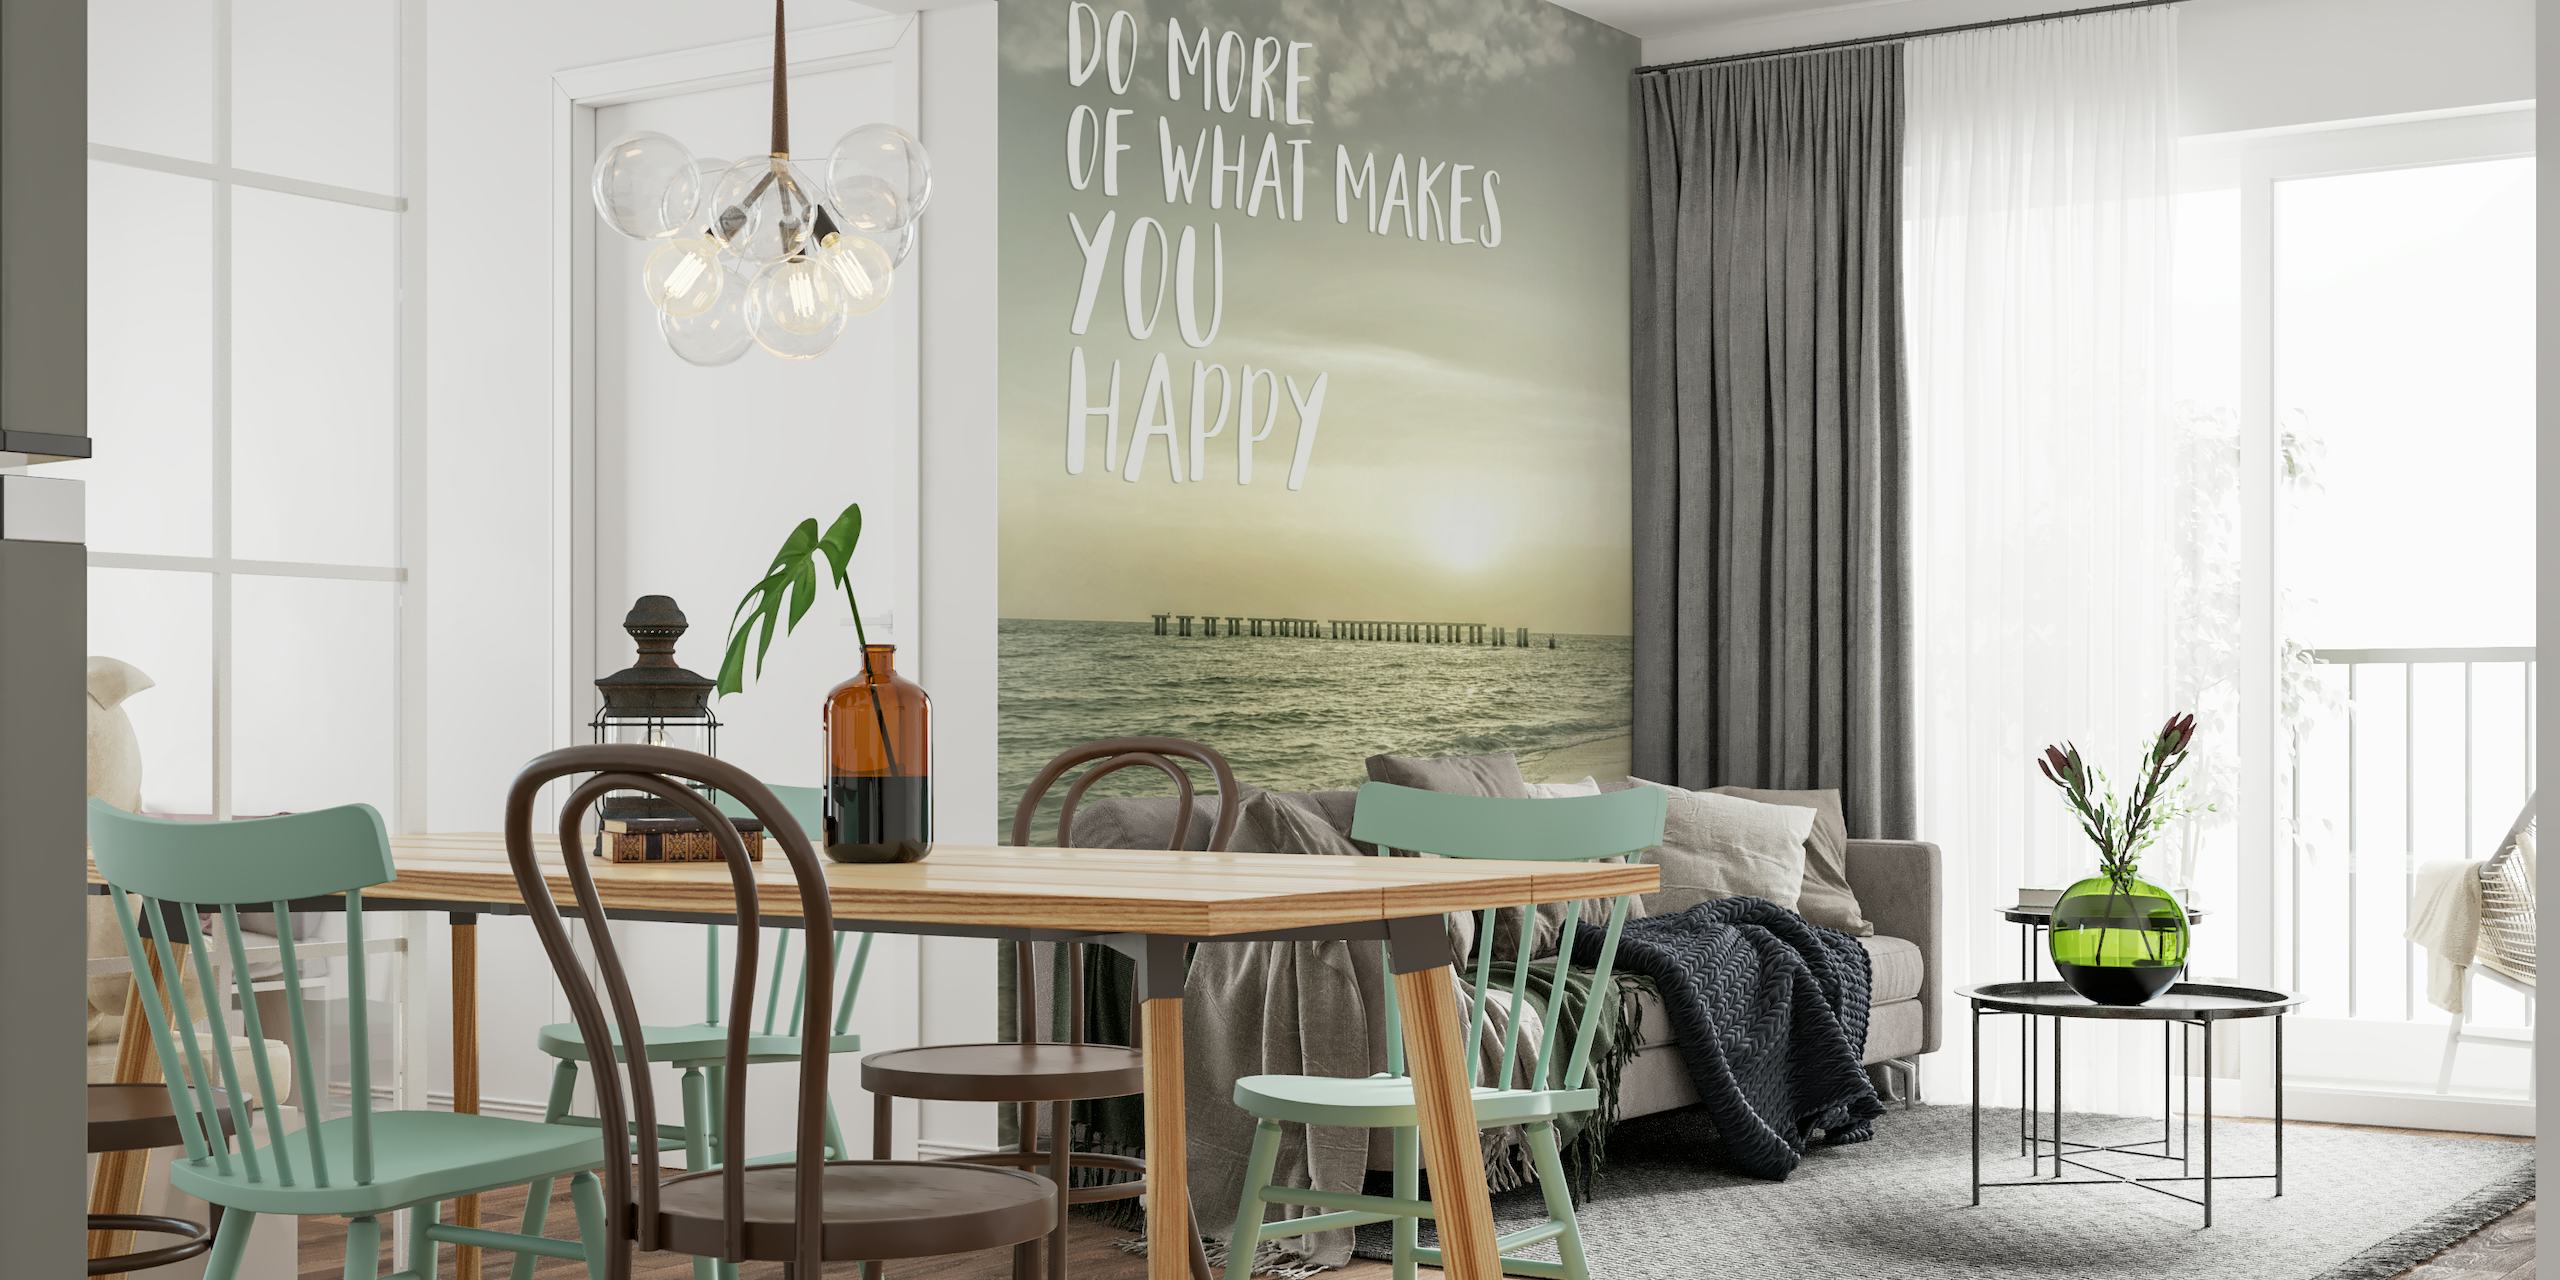 Do more of what makes you happy | Sunset papel de parede